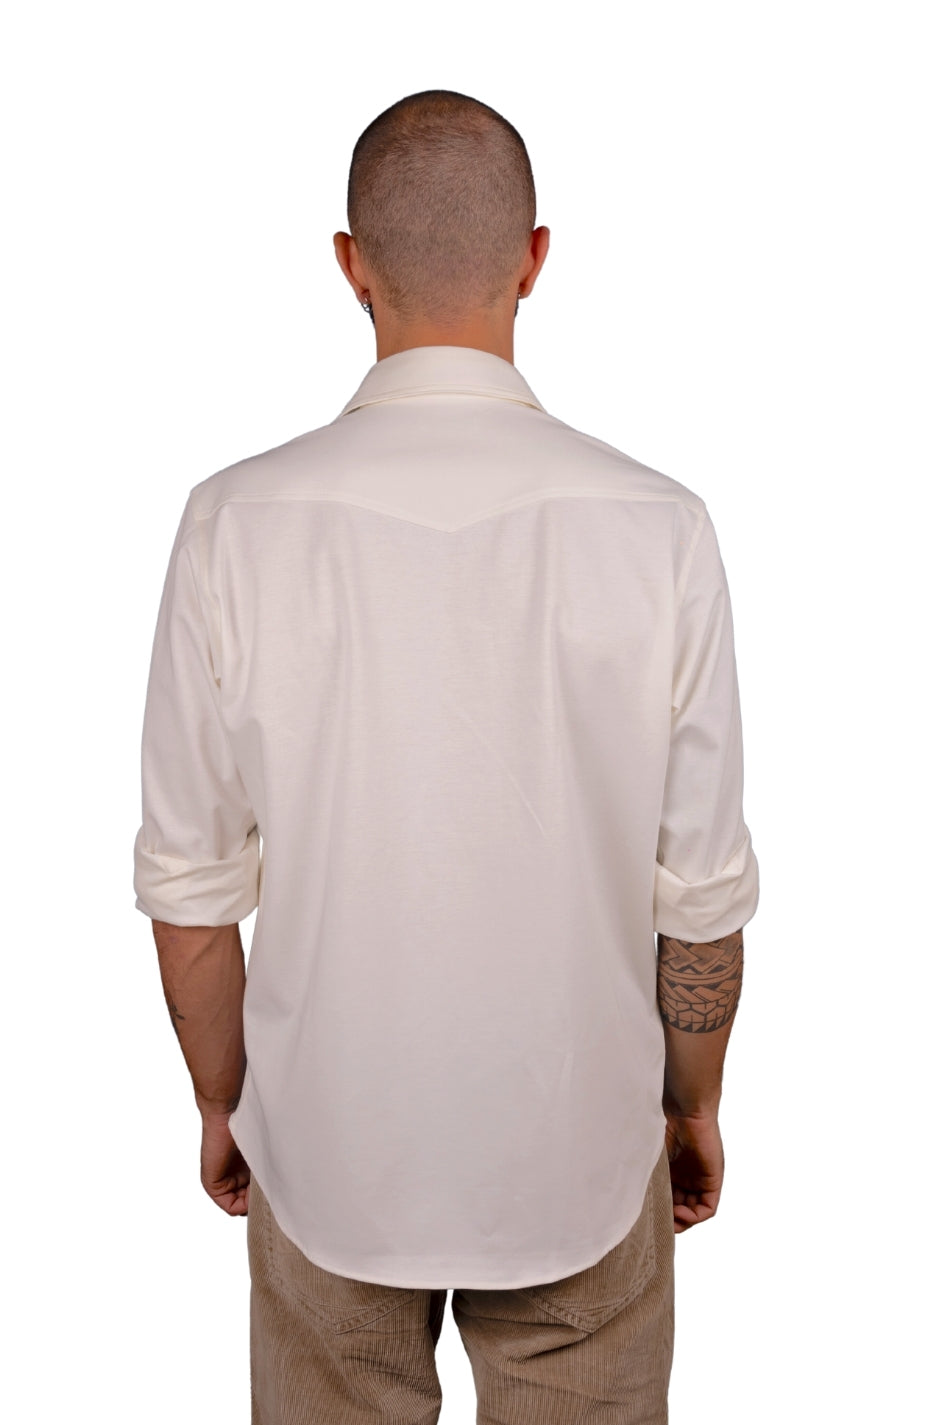 "L.A." - CASUAL SHIRT IN JERSEY COTTON